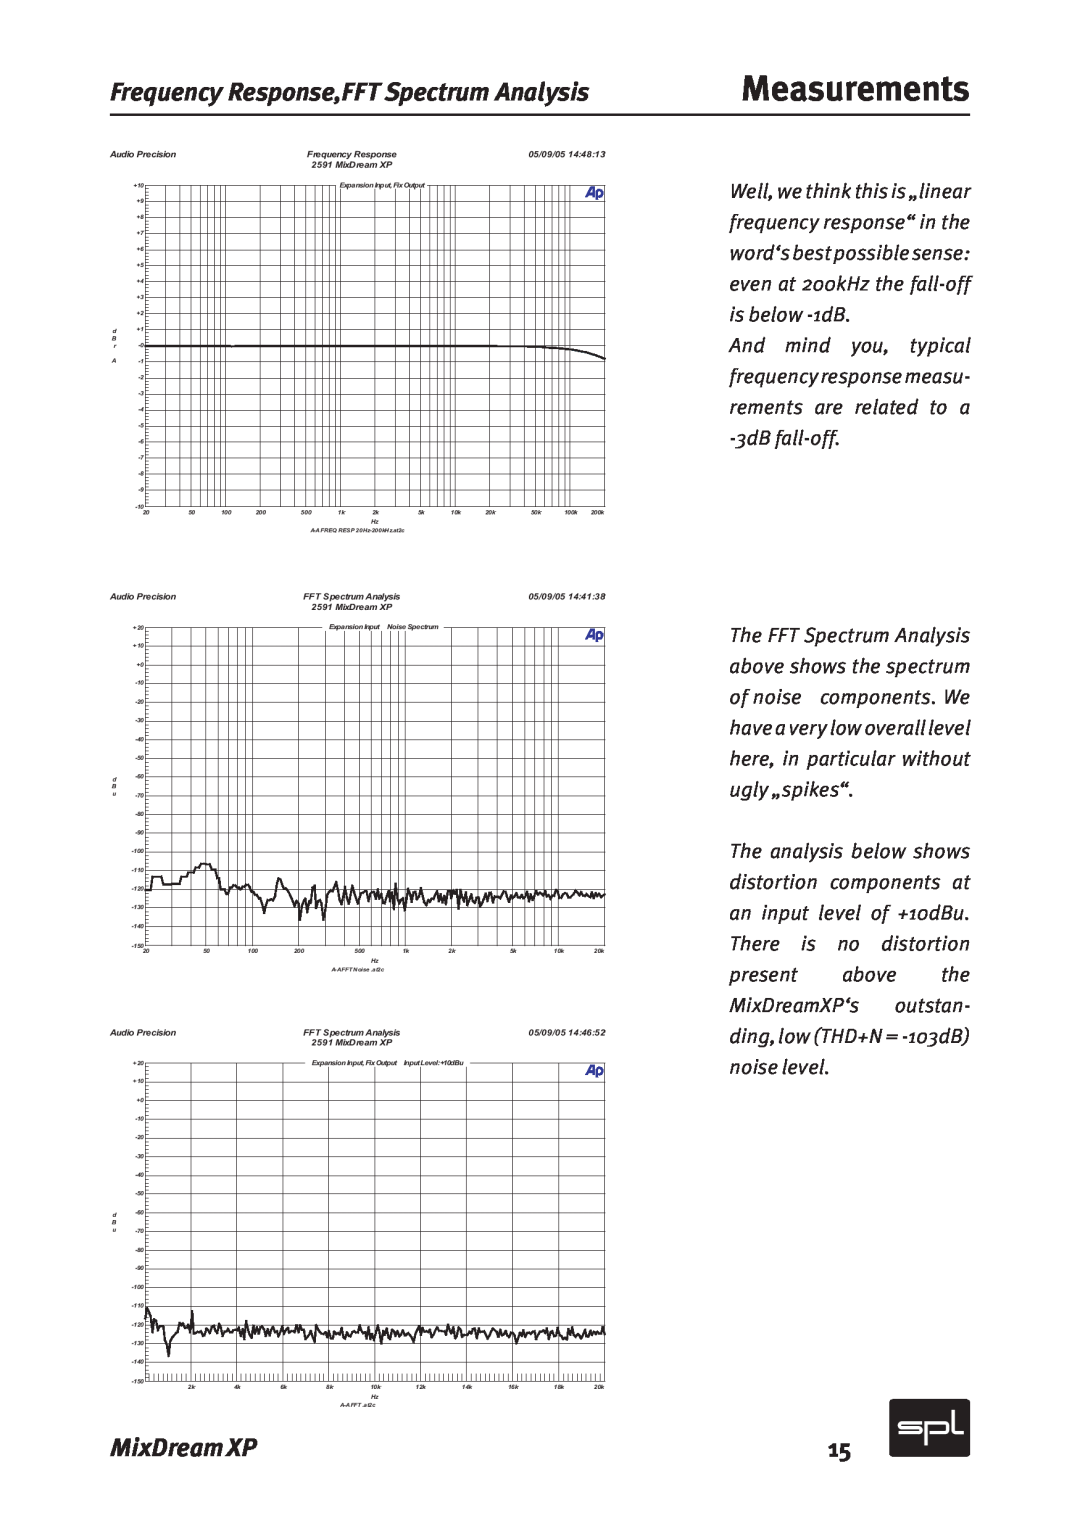 Sound Performance Lab Model 2591 manual Frequency Response,FFT Spectrum Analysis, Measurements, MixDream XP 